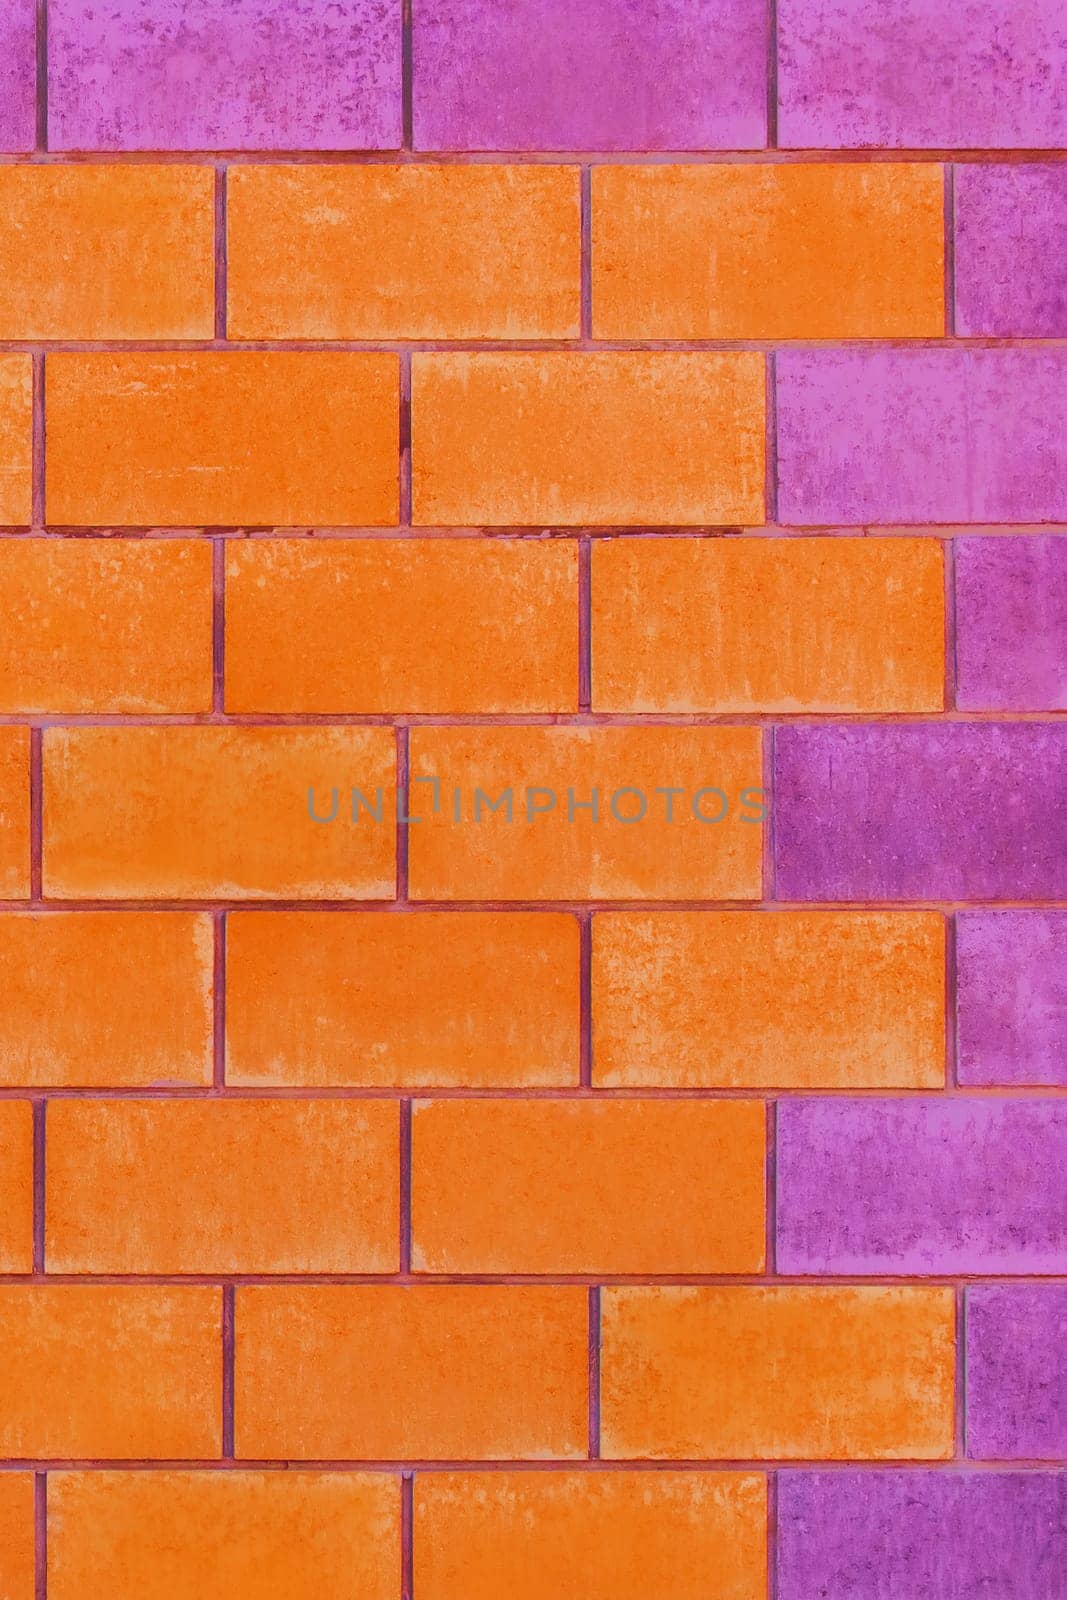 Orange and purple paint on brick blocks urban color vibrant design wall texture background architecture by AYDO8